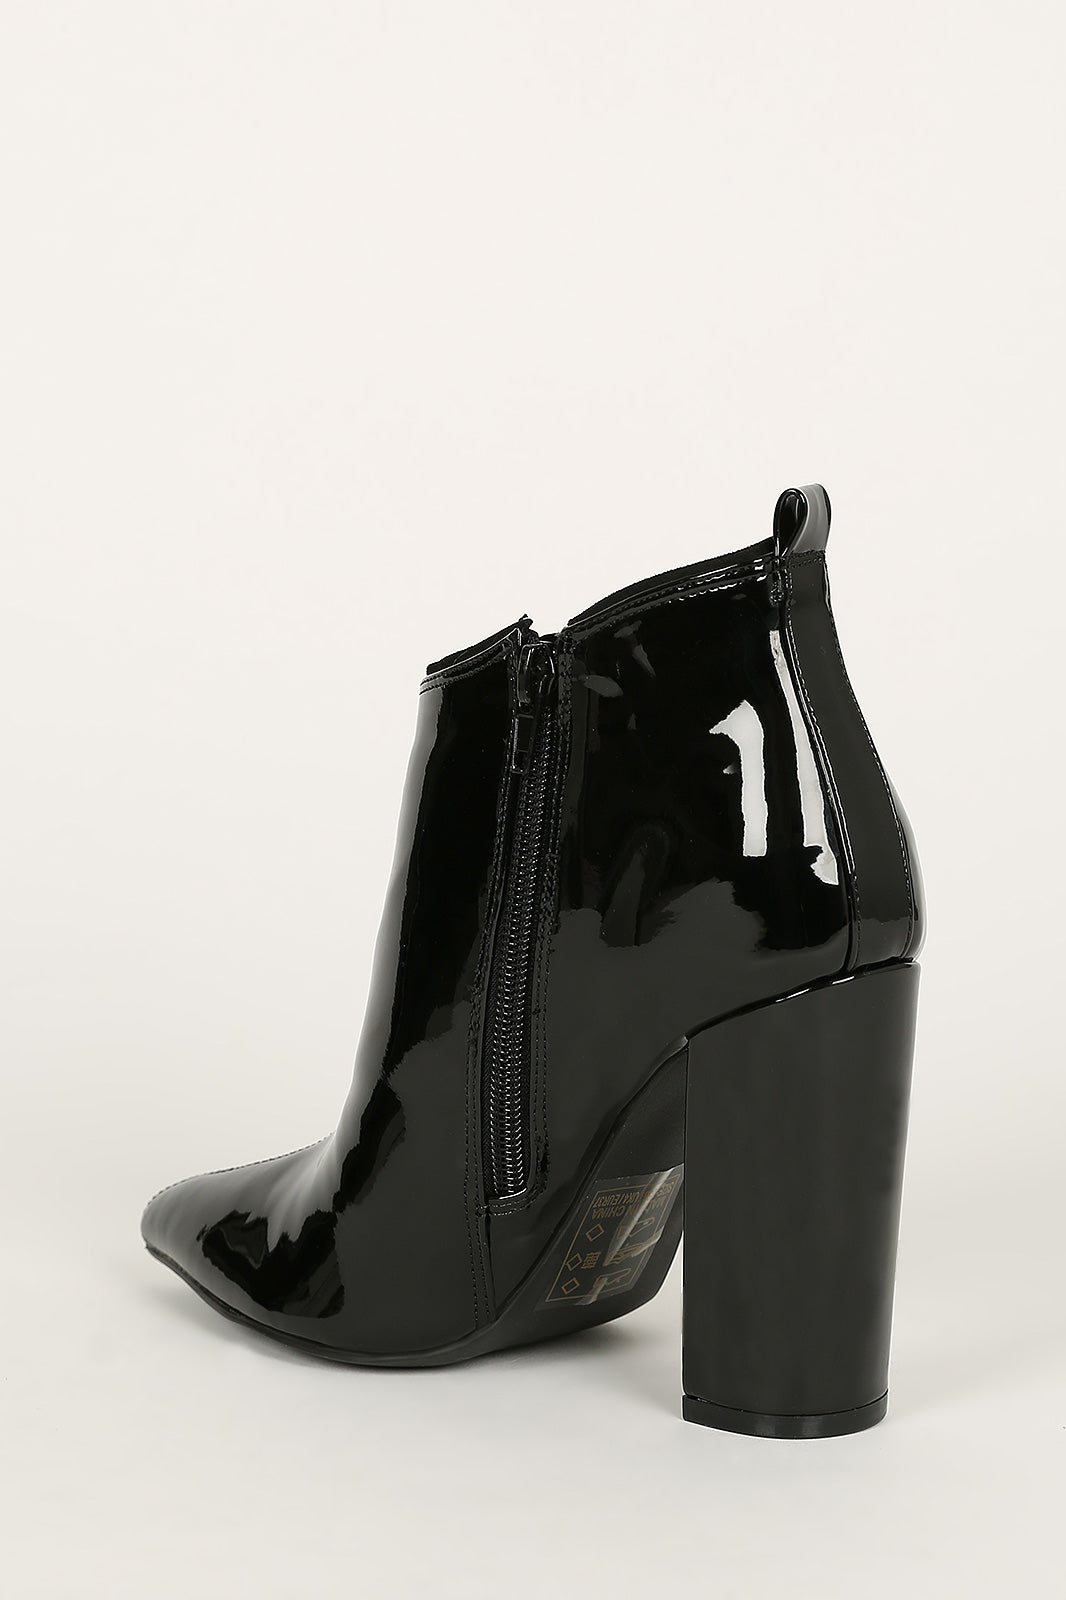 Midnight Muse - Black Pointed Toe Ankle Booties 